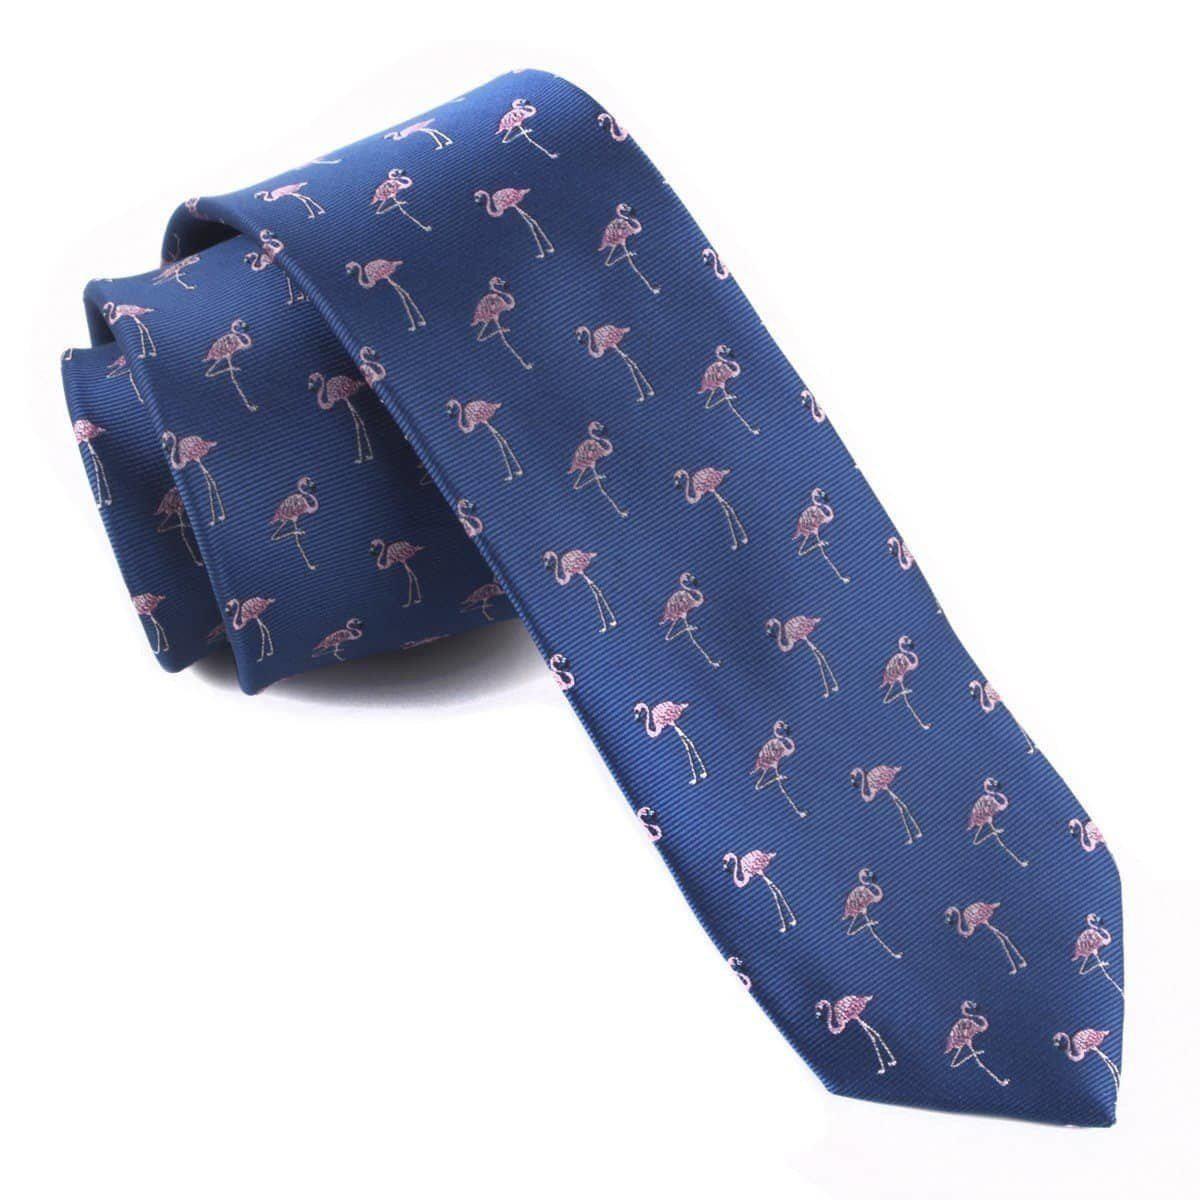 Blue and Pink Flamingo Skinny Tie 2.36 MIA - MYTIESHOP-Neckties-Blue and Pink Flamingo Skinny Tie weddings and events, great for prom and anniversary gifts. Mens floral ties near me us ties tie shops cool ties skinny tie Cotton-Mytieshop. Skinny ties for weddings anniversaries. Father of bride. Groomsmen. Cool skinny neckties for men. Neckwear for prom, missions and fancy events. Gift ideas for men. Anniversaries ideas. Wedding aesthetics. Flower ties. Dry flower ties.